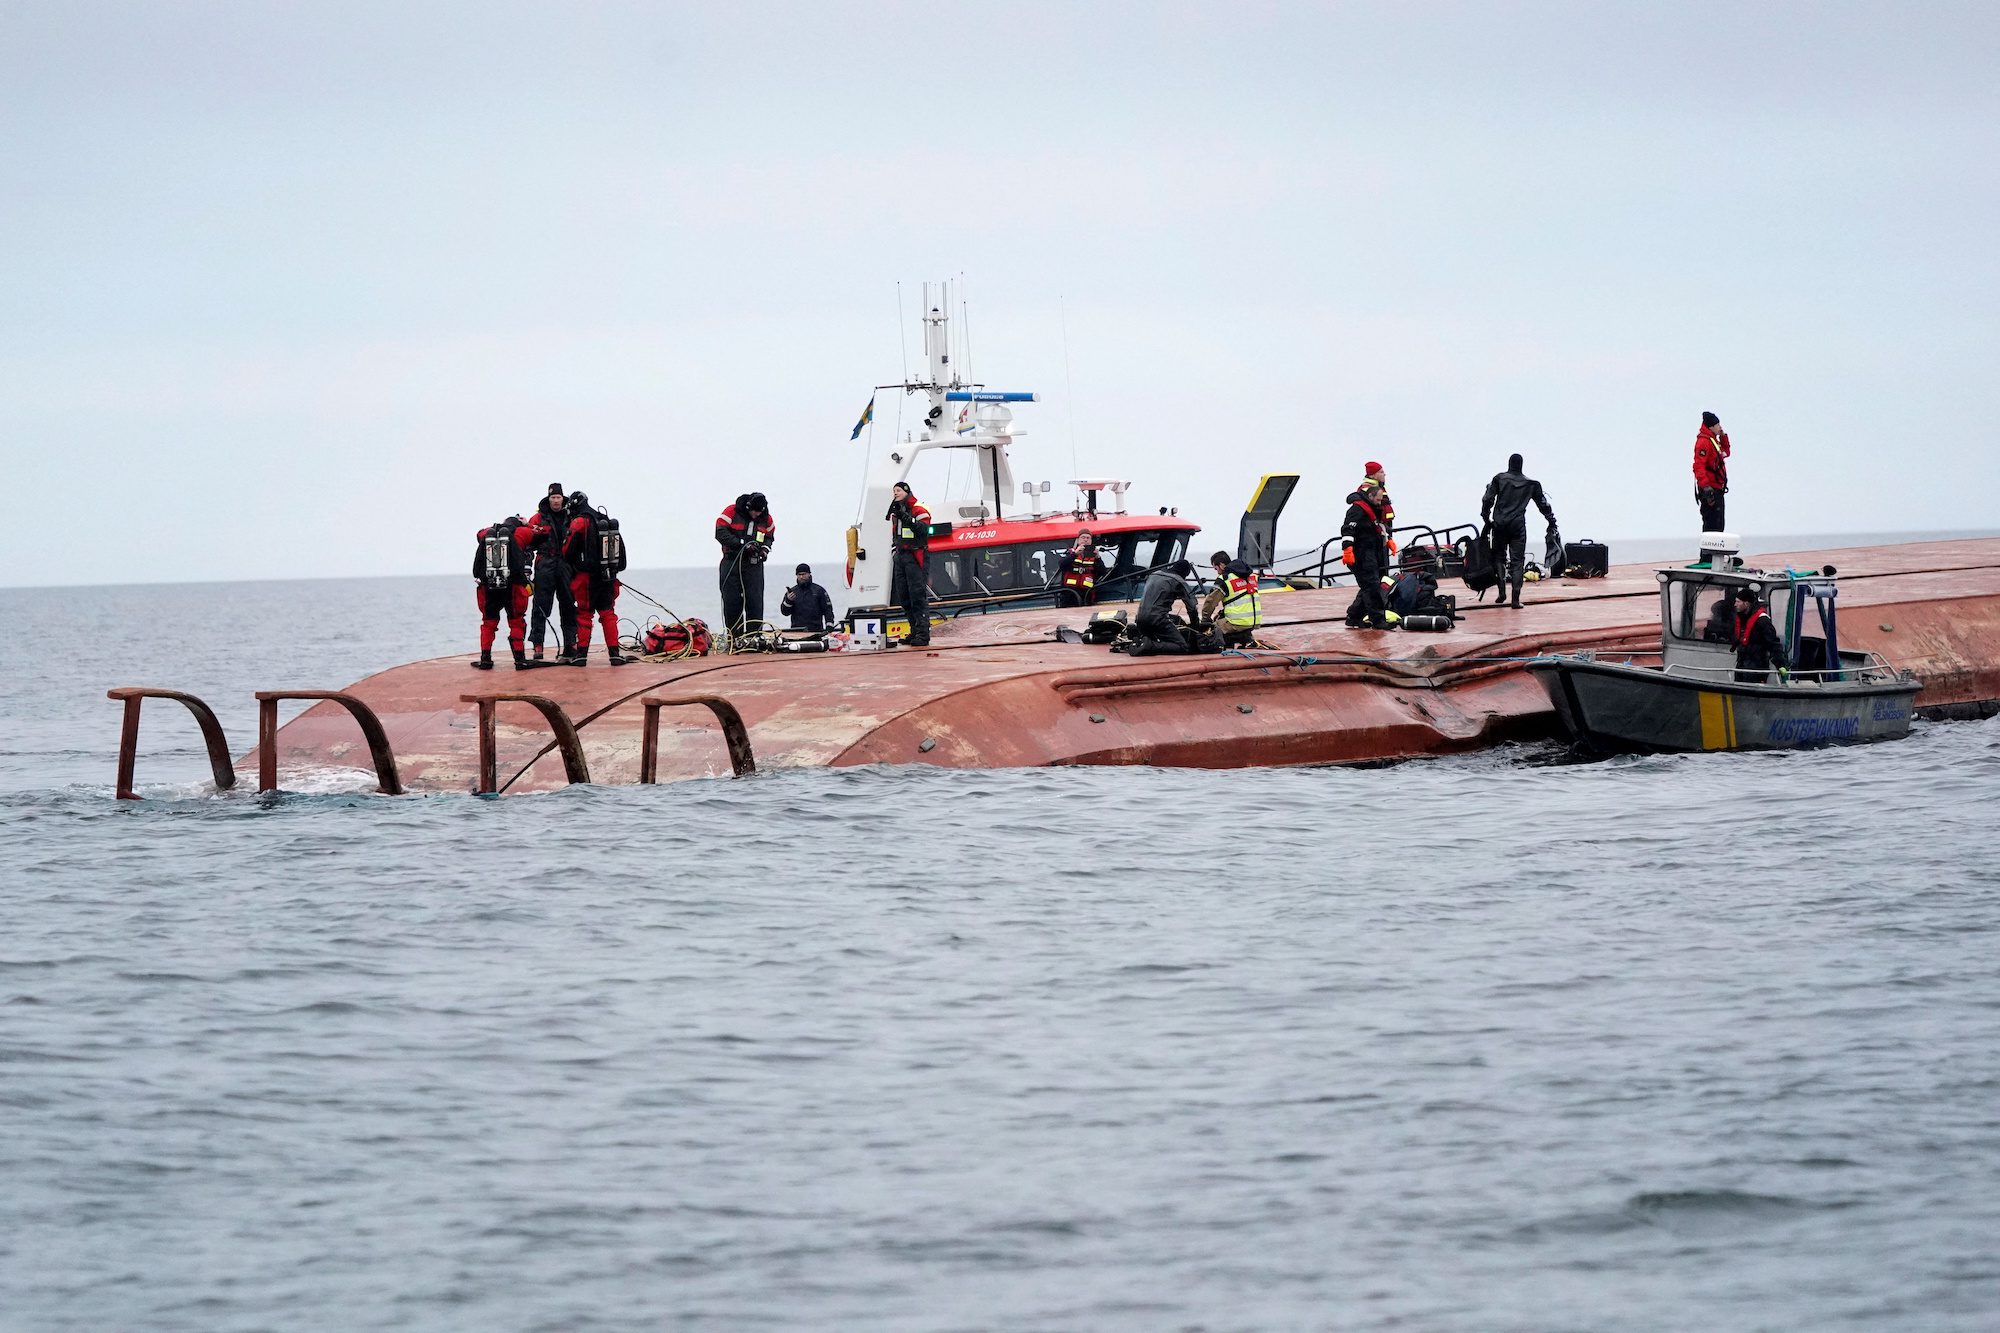 Divers work aboard the Danish cargo ship Karin Hoej which collided with the British cargo ship Scot Carrier between Ystad and Bornholm, on the Baltic Sea December 13, 2021. Johan Nilsson/TT News Agency/via REUTERS